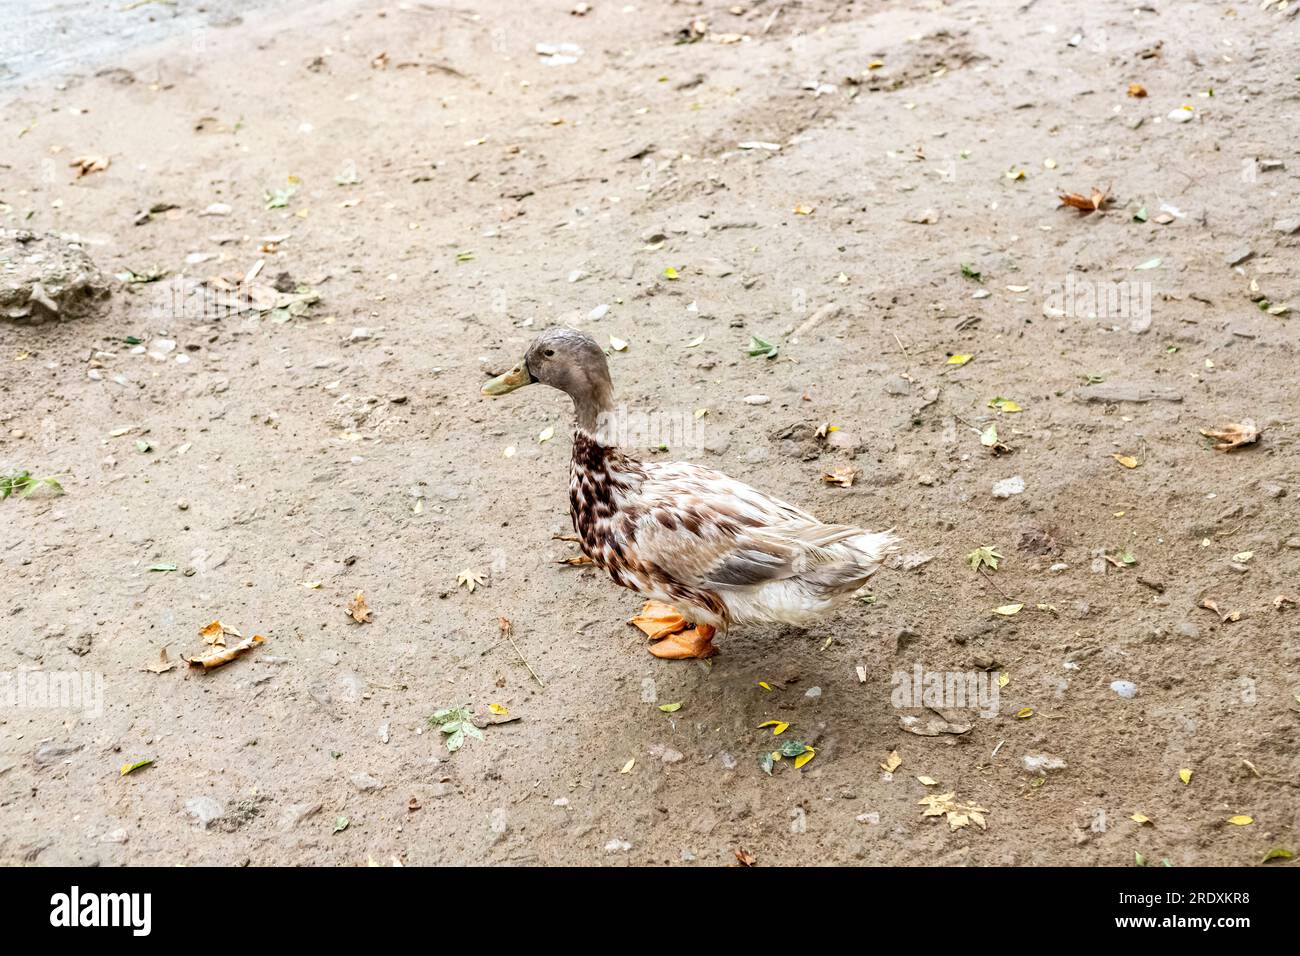 A brown domestic duck in the yard Stock Photo